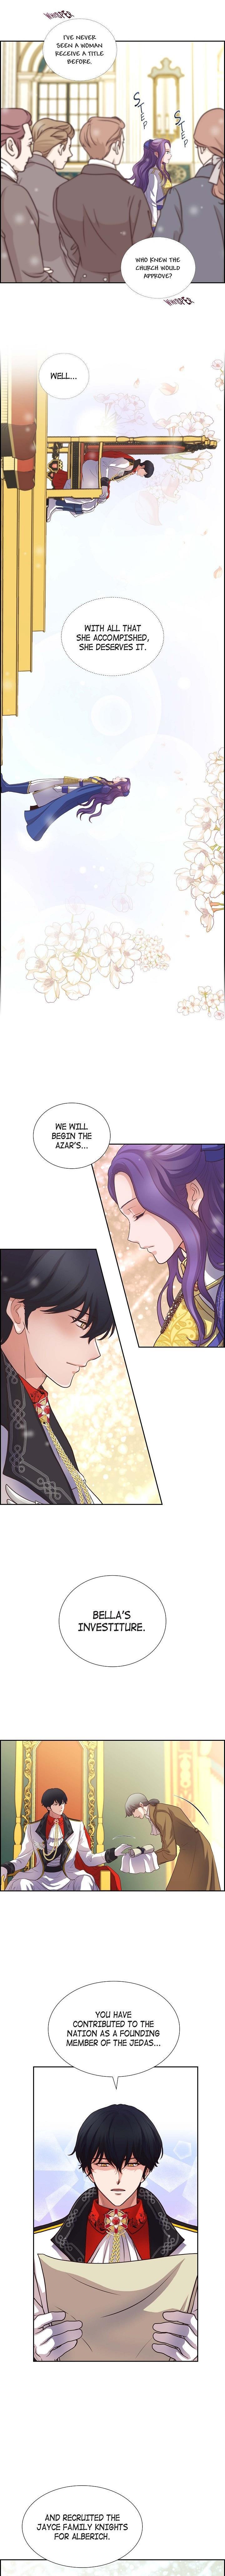 On The Emperor's Lap Chapter 99 page 2 - Mangakakalot